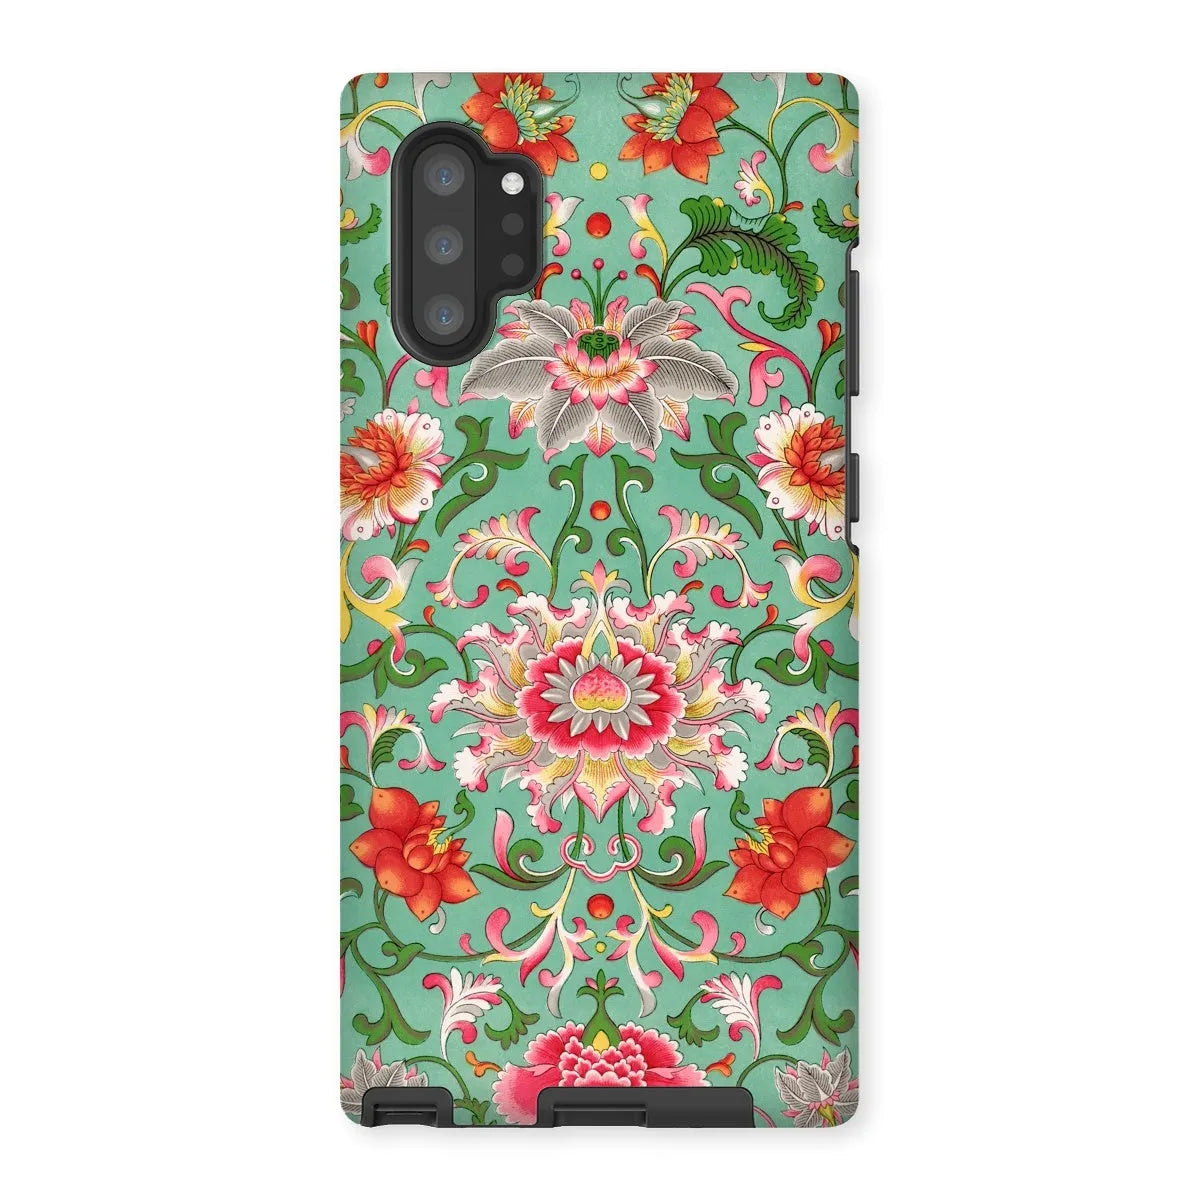 Chinese Floral Aesthetic Art Phone Case - Owen Jones - Samsung Galaxy Note 10p / Matte - Mobile Phone Cases - Aesthetic